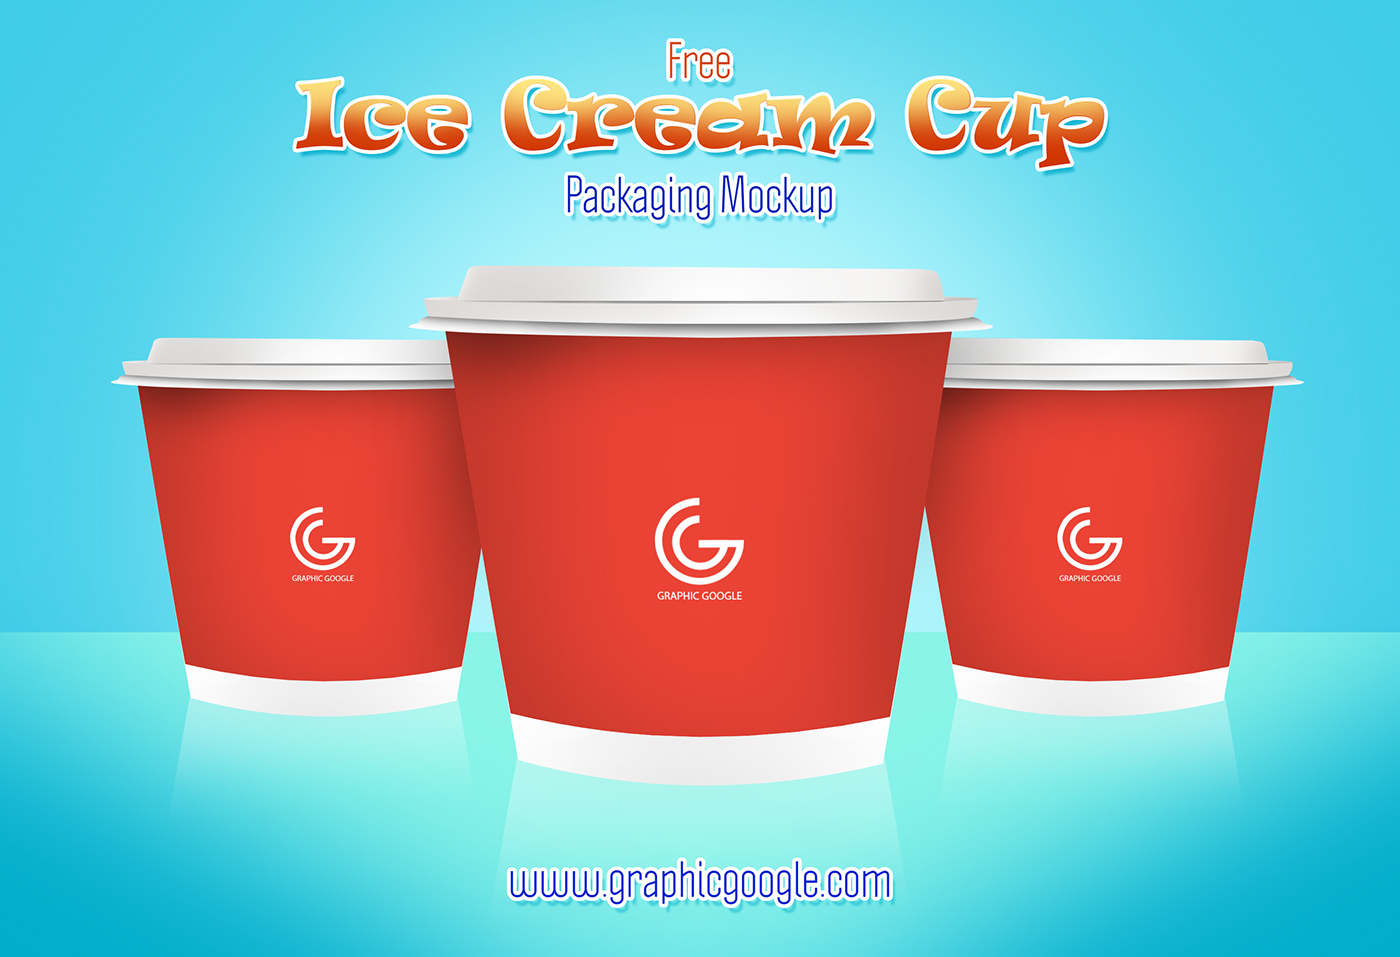 Download Free Ice Cream Cup Packaging Mockup on Behance